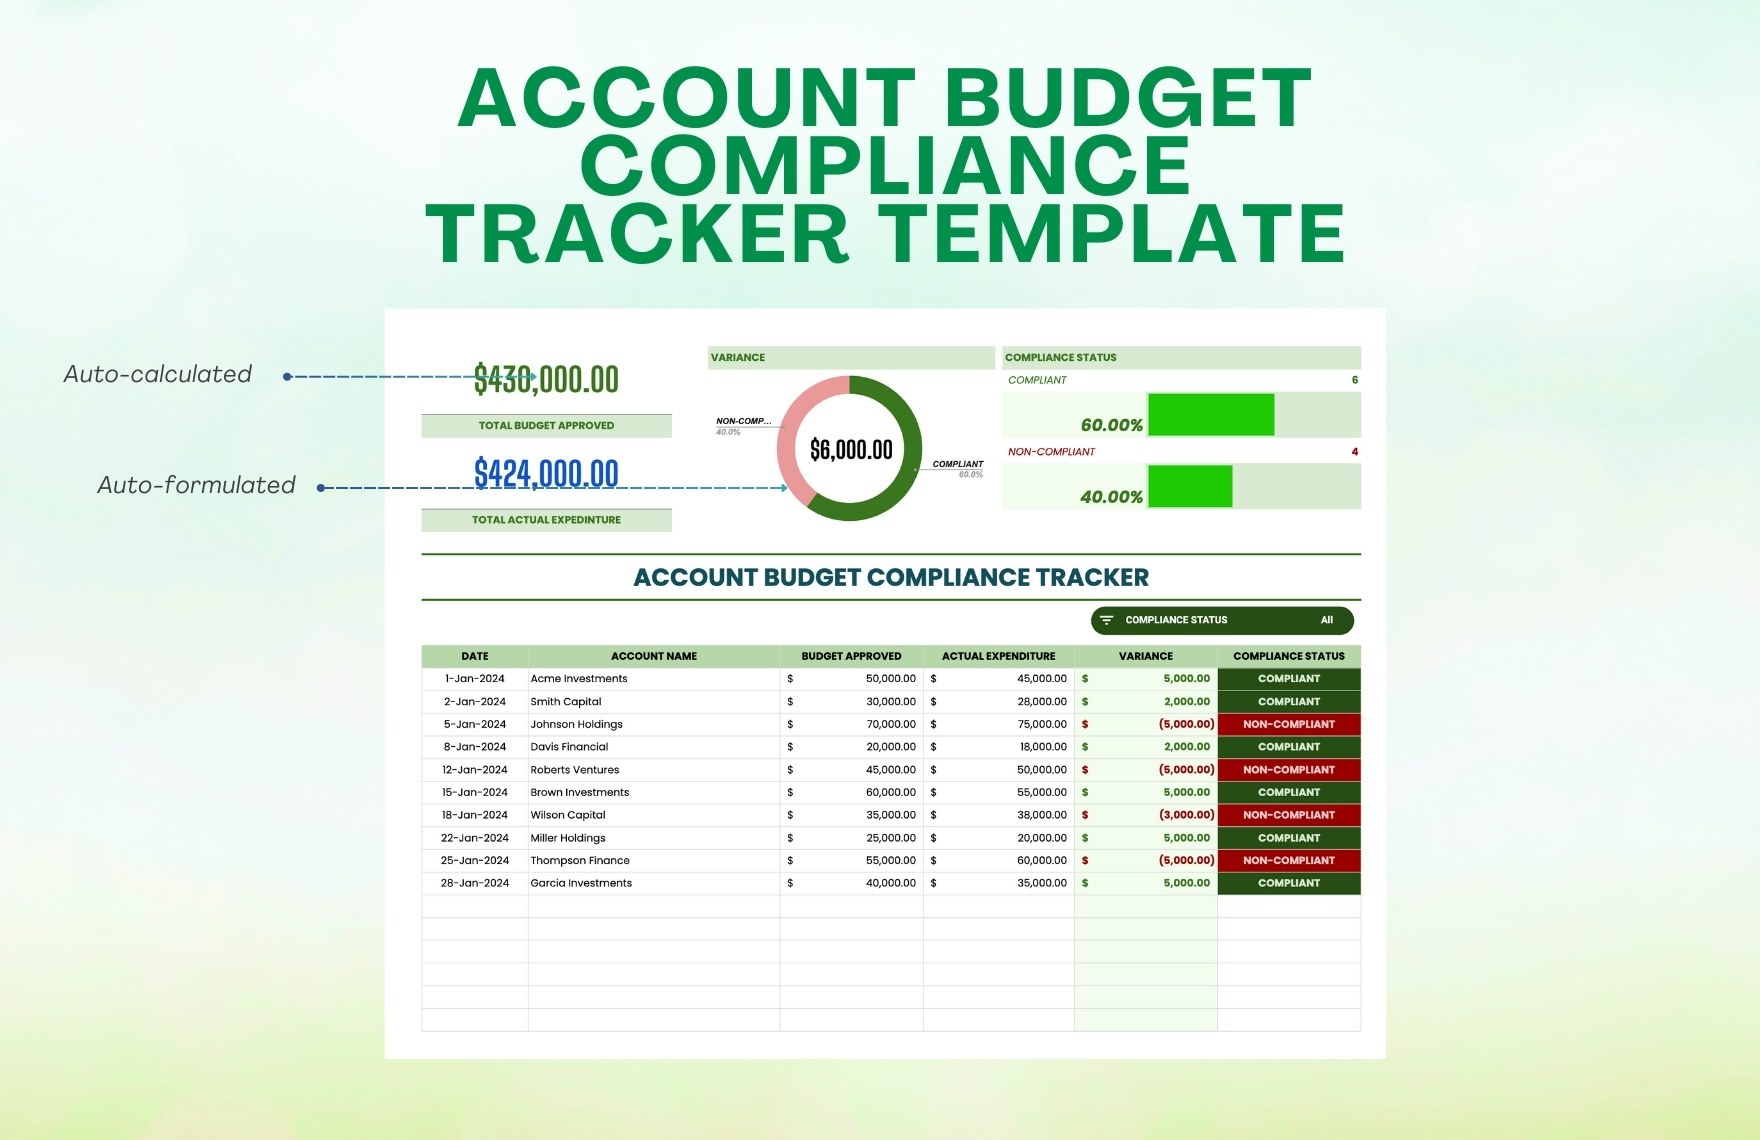 Account Budget Compliance Tracker Template